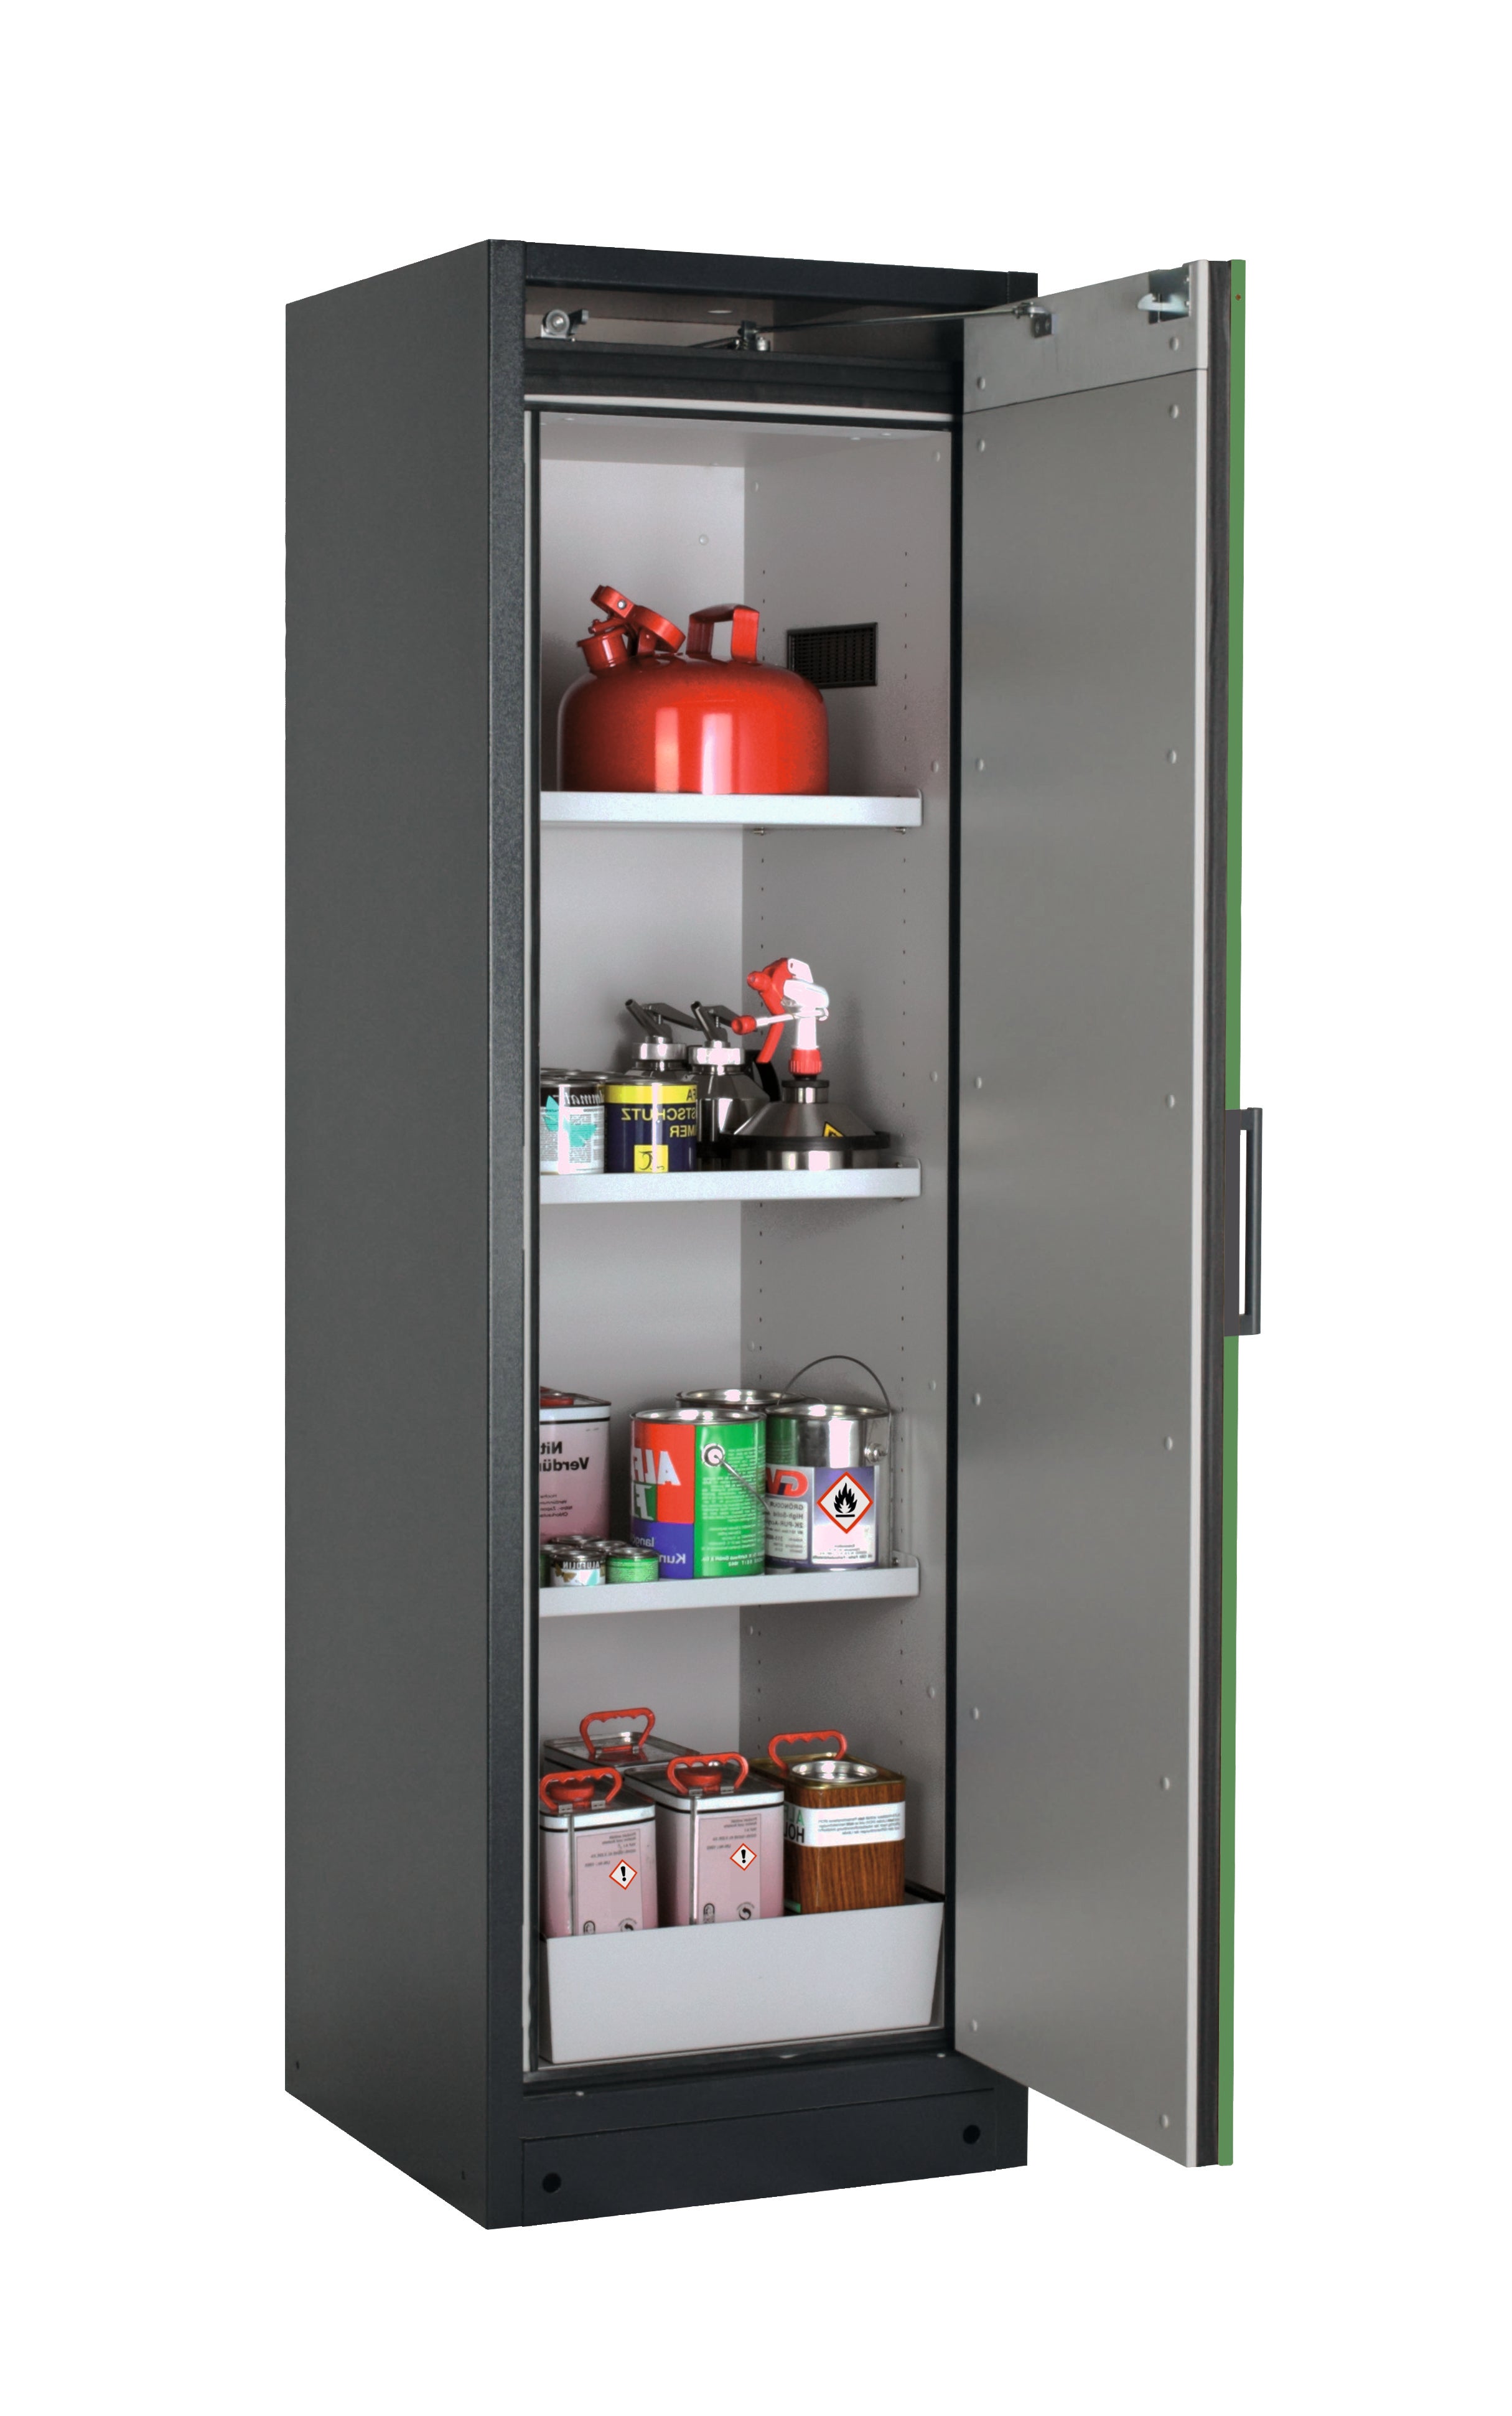 Type 90 safety storage cabinet Q-CLASSIC-90 model Q90.195.060.R in reseda green RAL 6011 with 3x shelf standard (sheet steel),